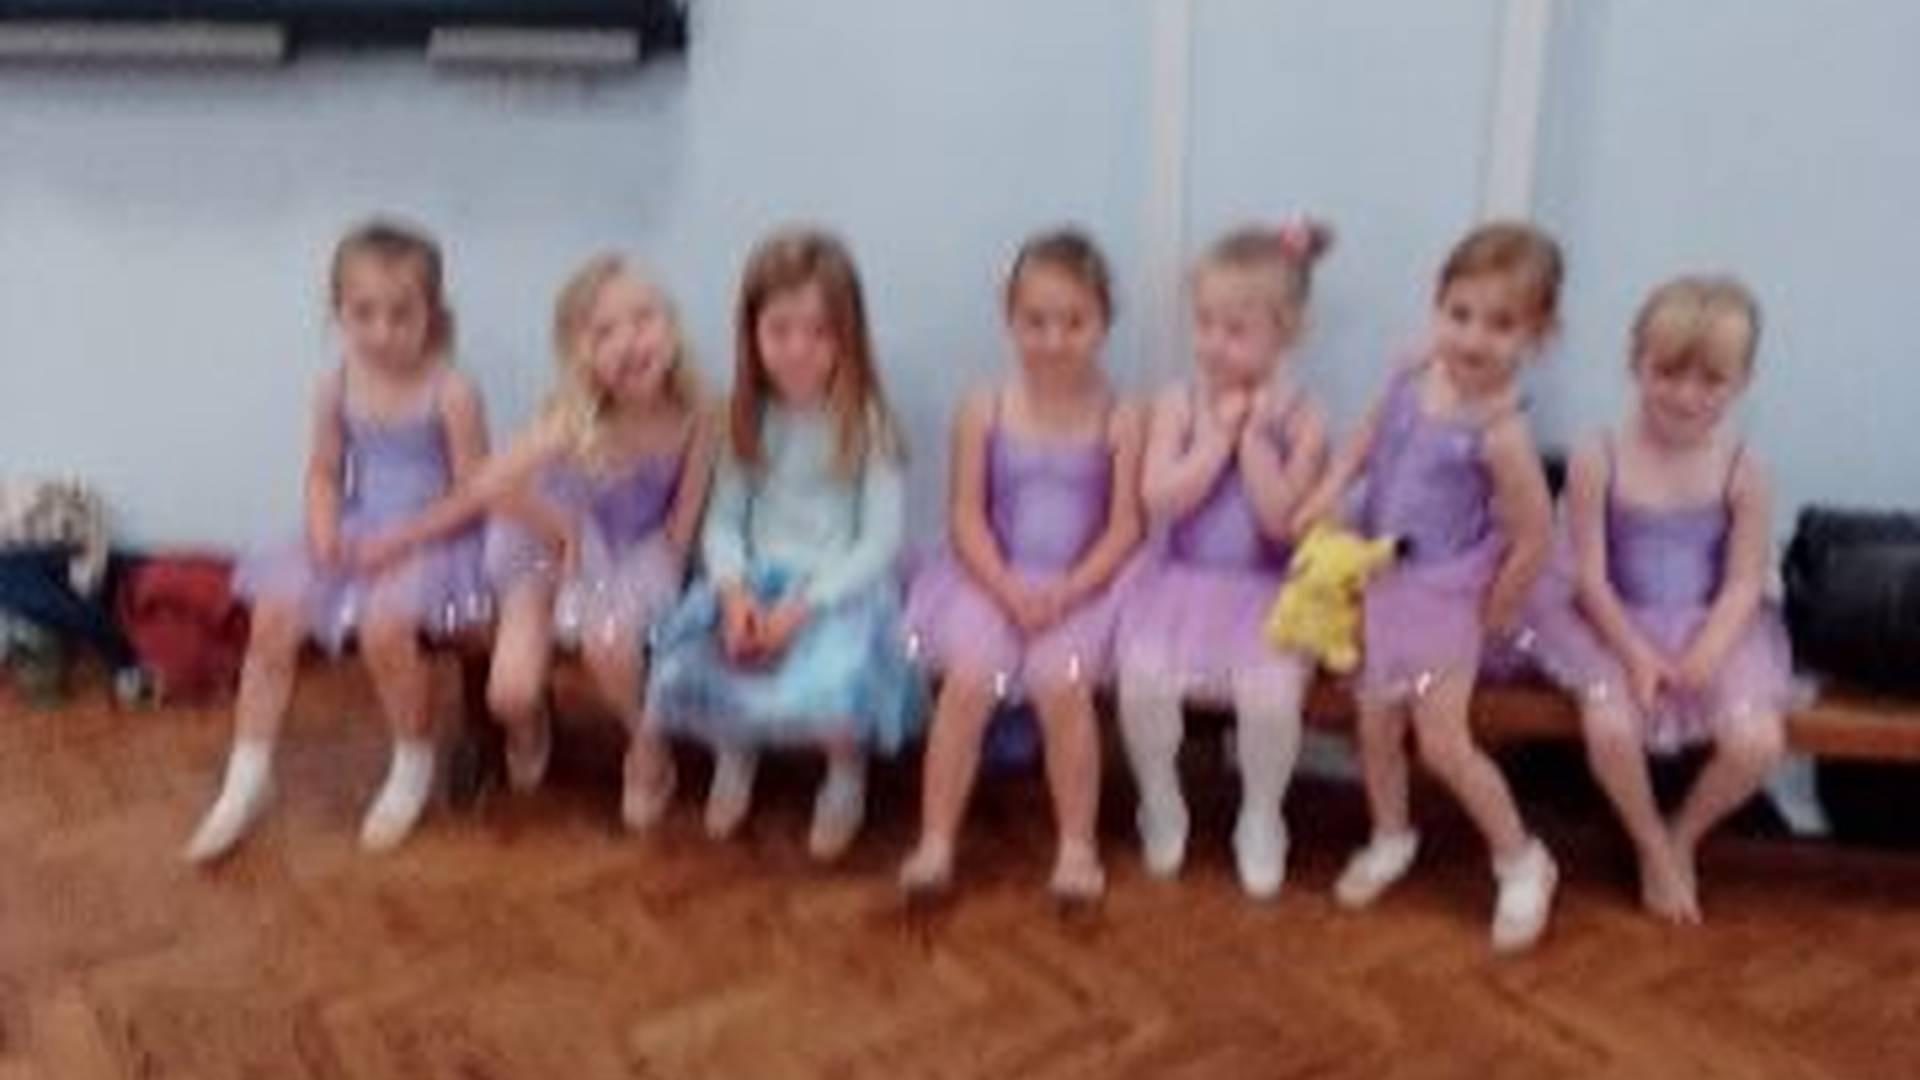 All Little Dancers photo